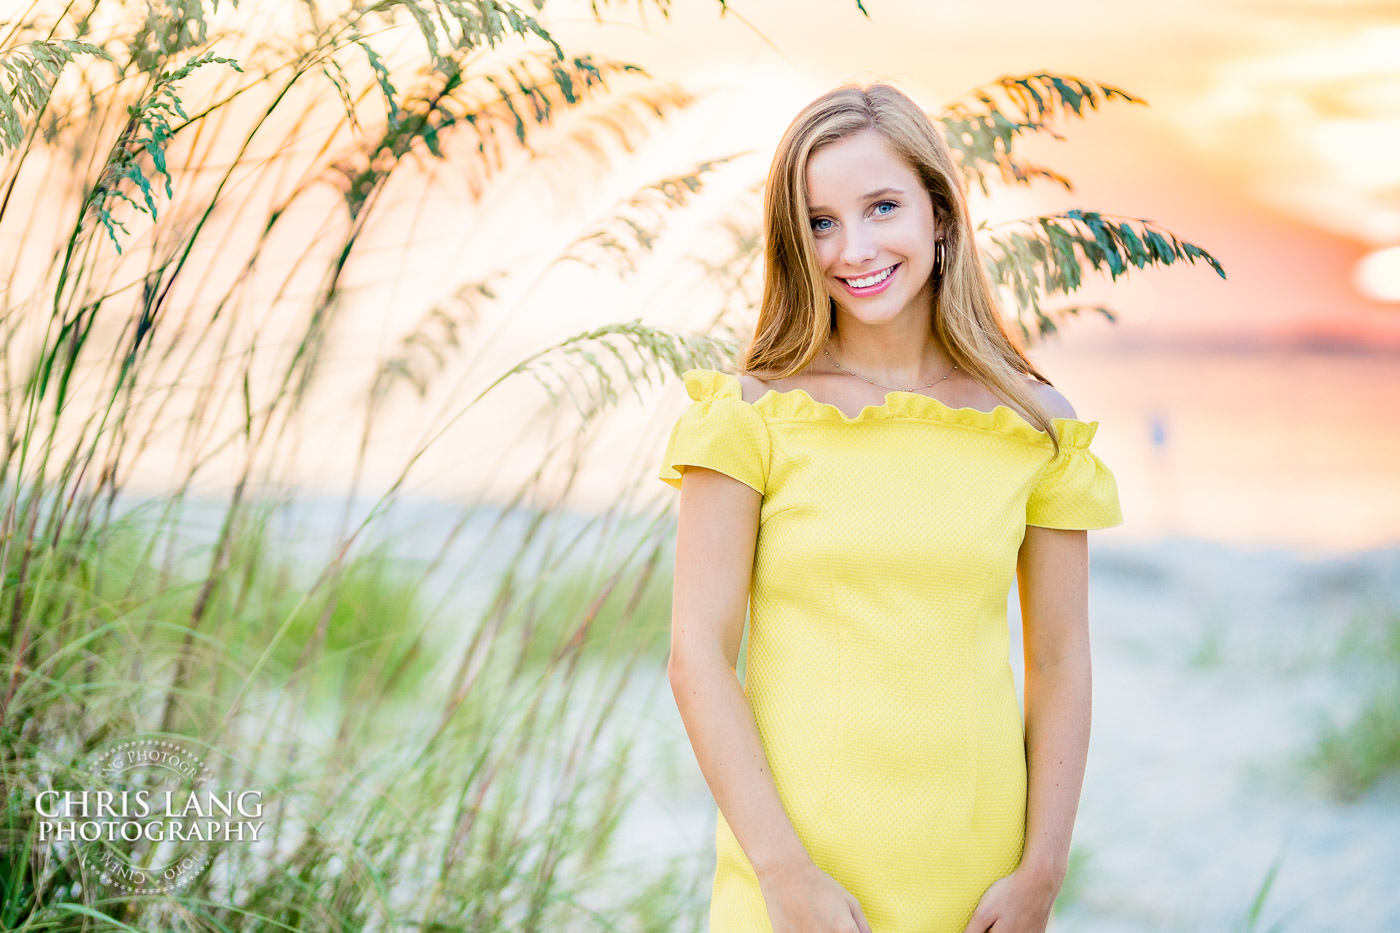 Topsail Island senior pictures - Topsail Island senior portrait photographers - senior portrait photography - photo ideas - chris lang photography